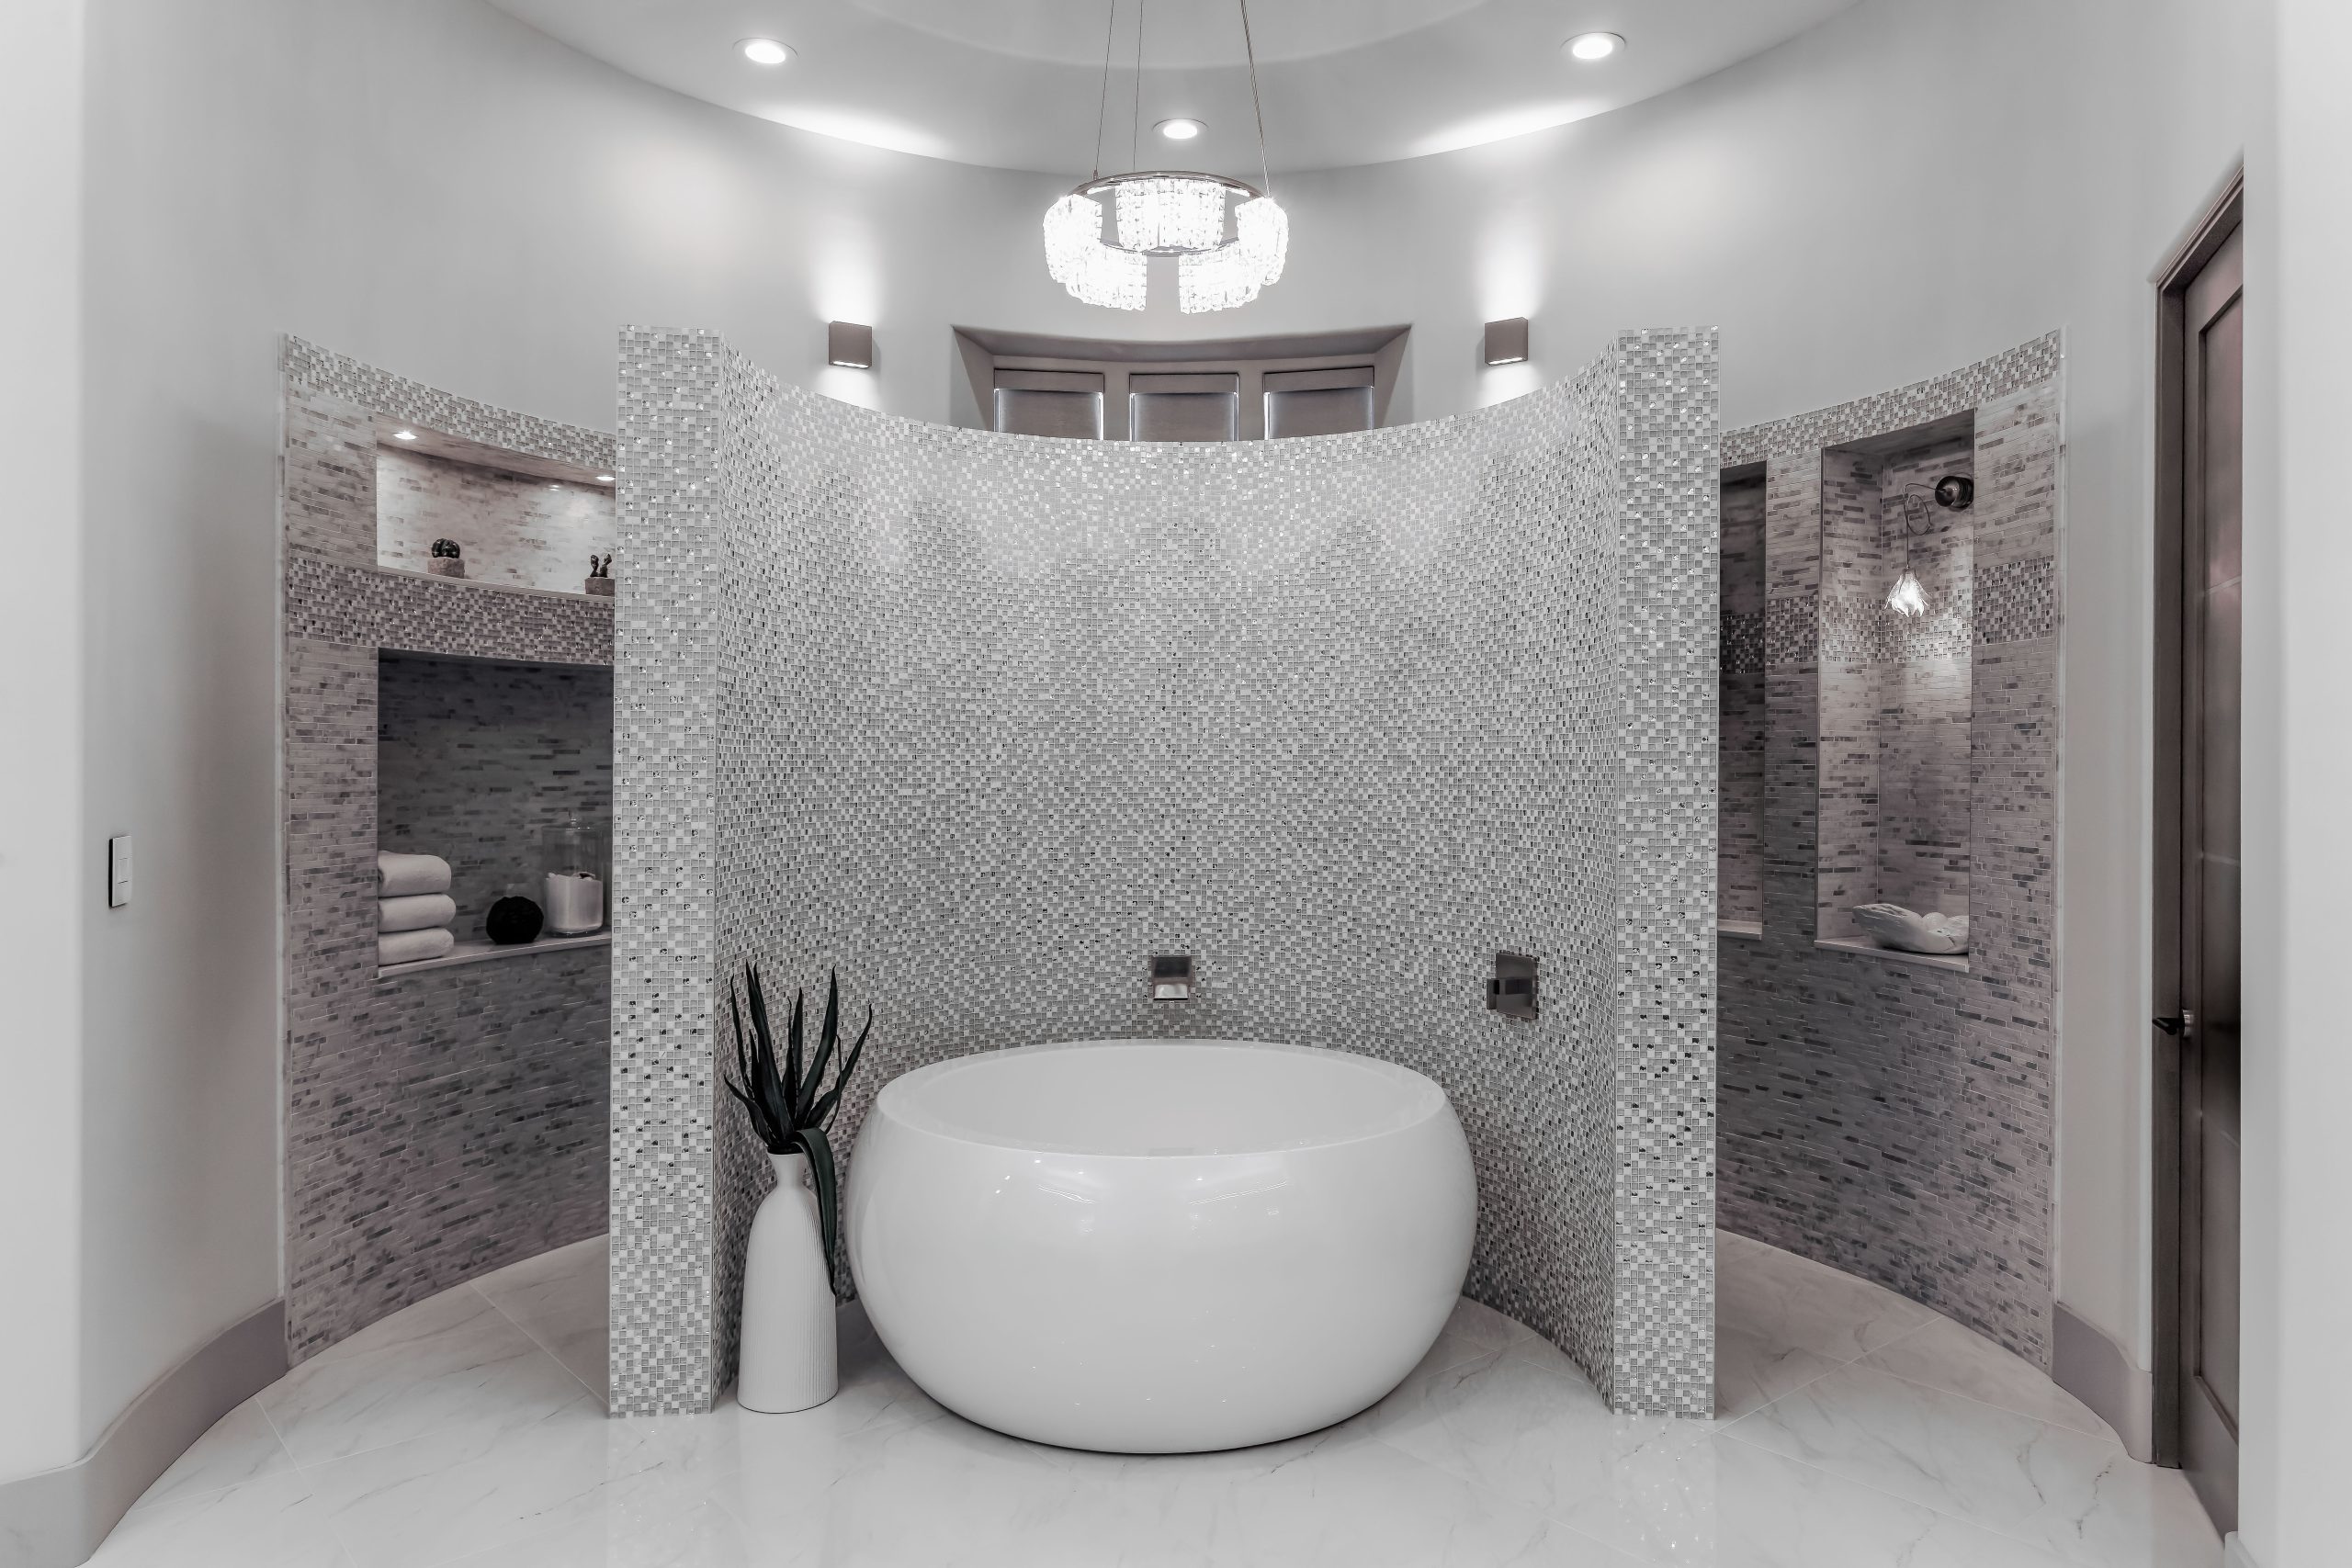 architectural photography, architectural bathroom